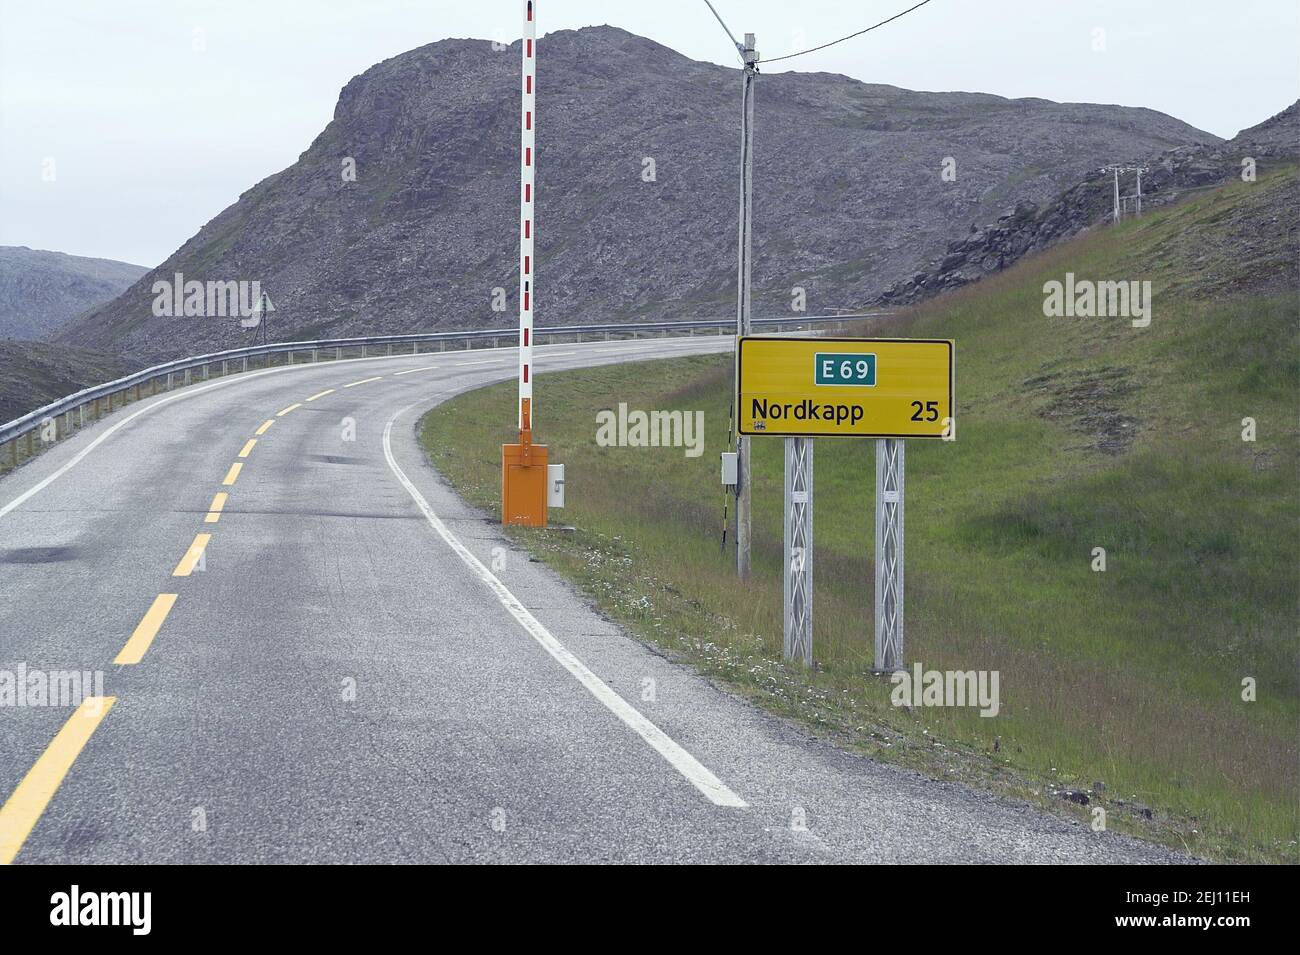 Nordkapp, North Cape, Norway, Norwegen; Traffic sign; Road sign at the entrance to the last section of the E 69 road, 25 km from Nordkapp (North Cape) Stock Photo